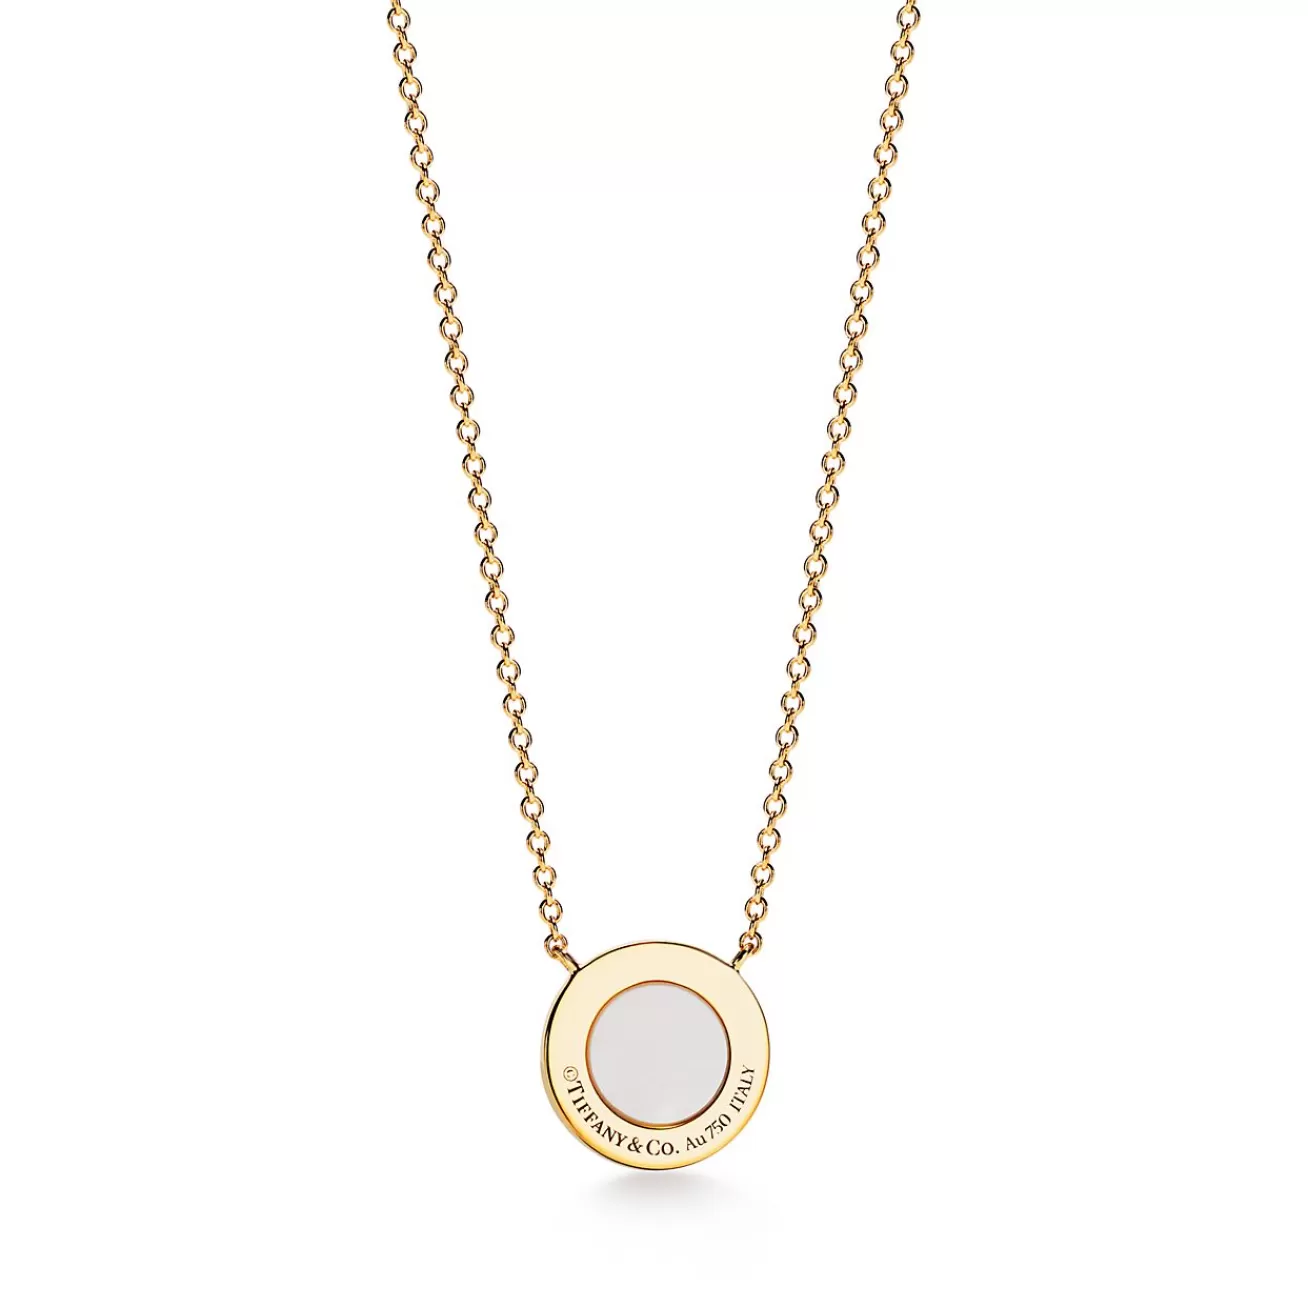 Tiffany & Co. Tiffany T diamond and mother-of-pearl circle pendant in 18k gold, small. | ^ Necklaces & Pendants | Gold Jewelry